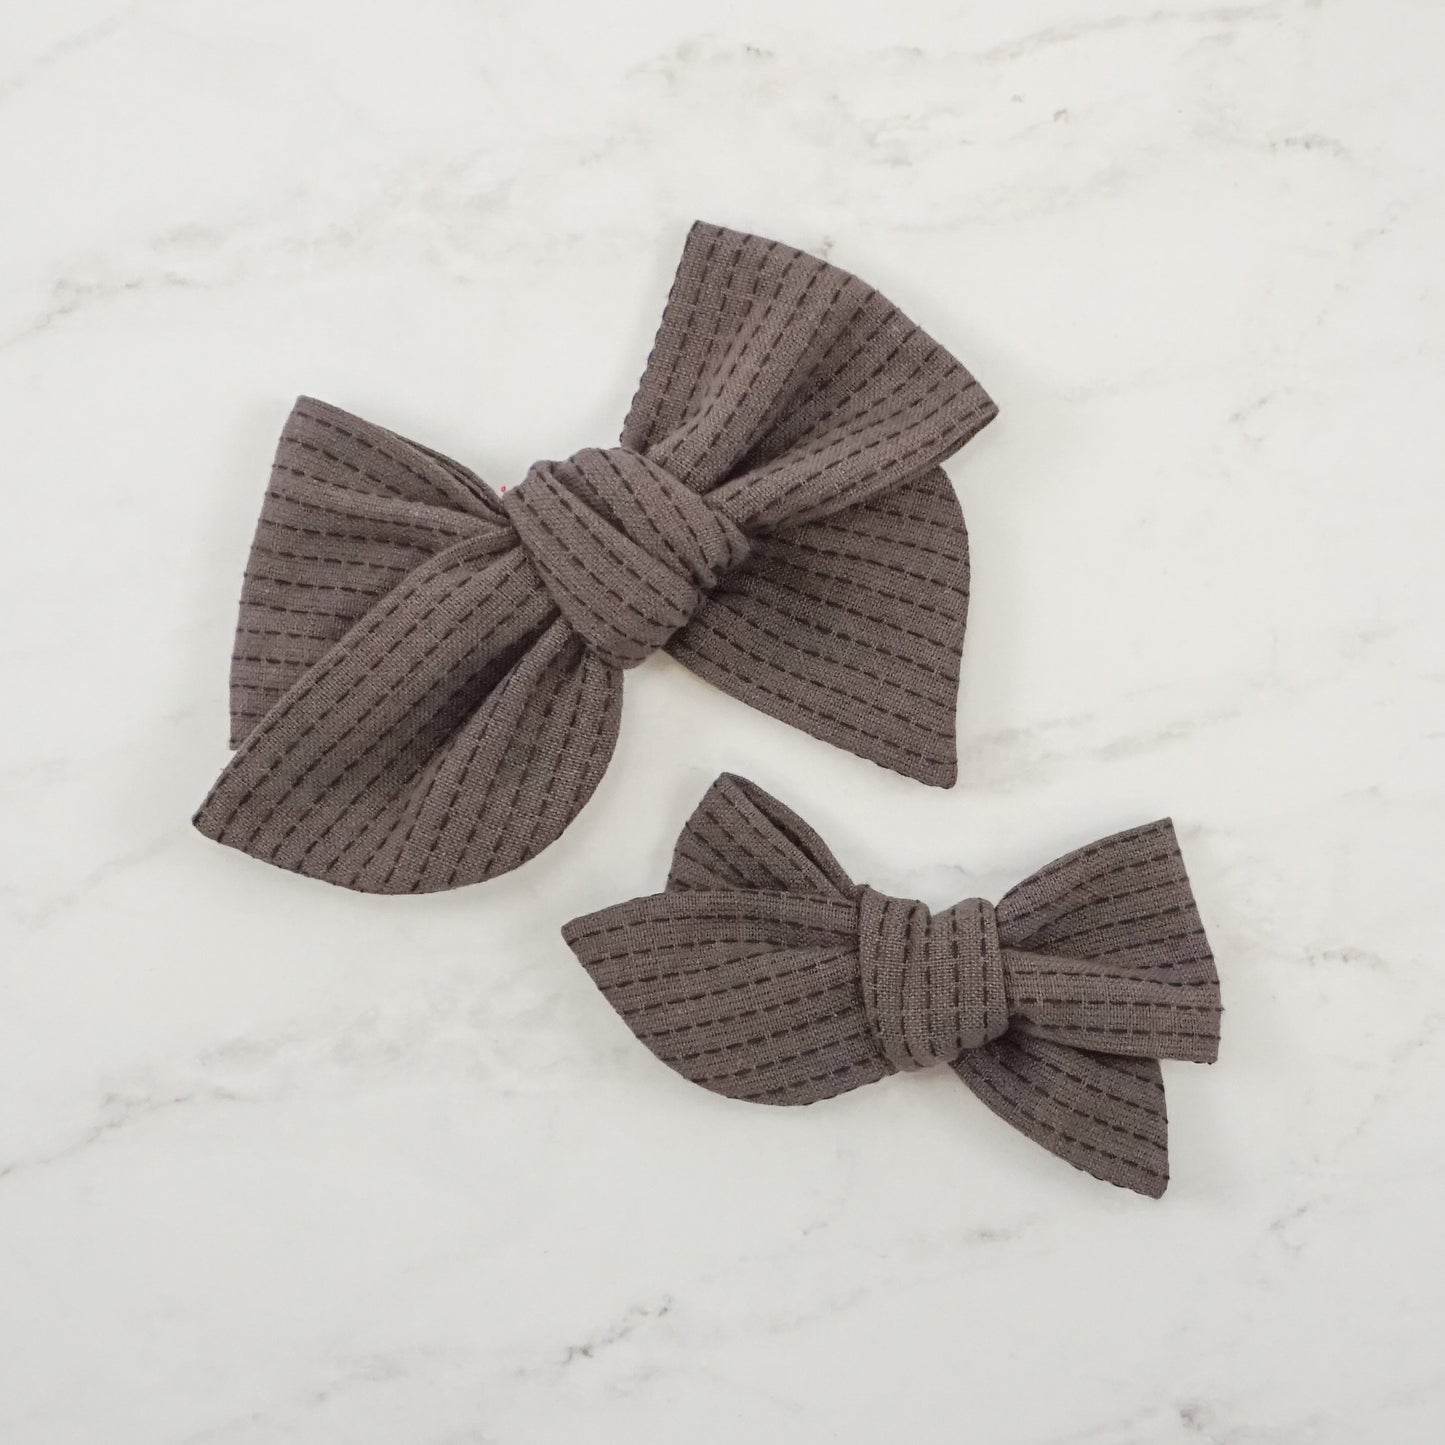 Handtied Fabric Bow - Berry Mocha Topstitch Embroidered